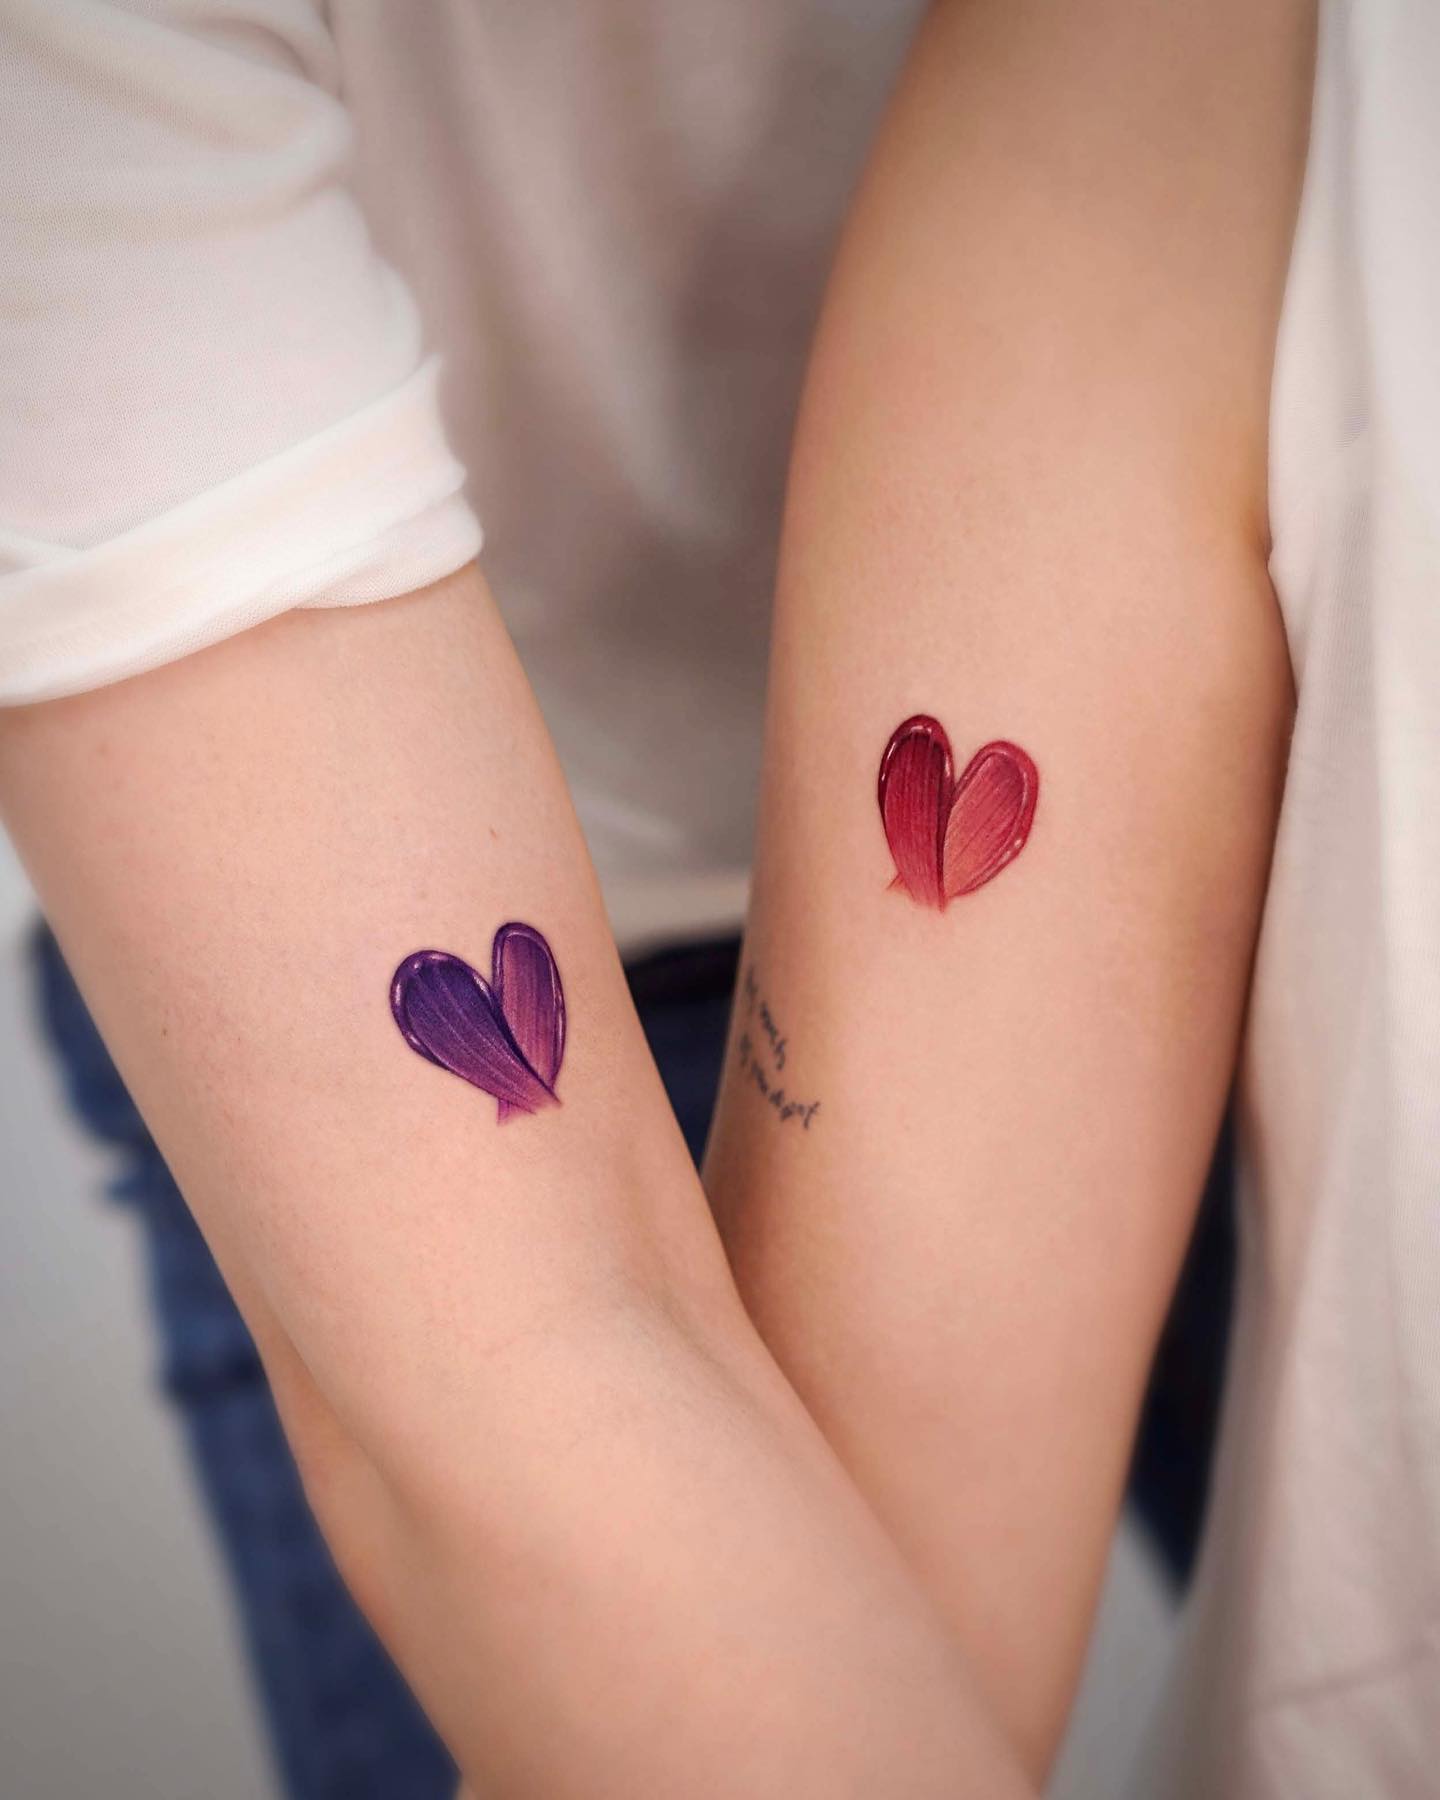 Colorful Matching Heart Tattoos on Arms